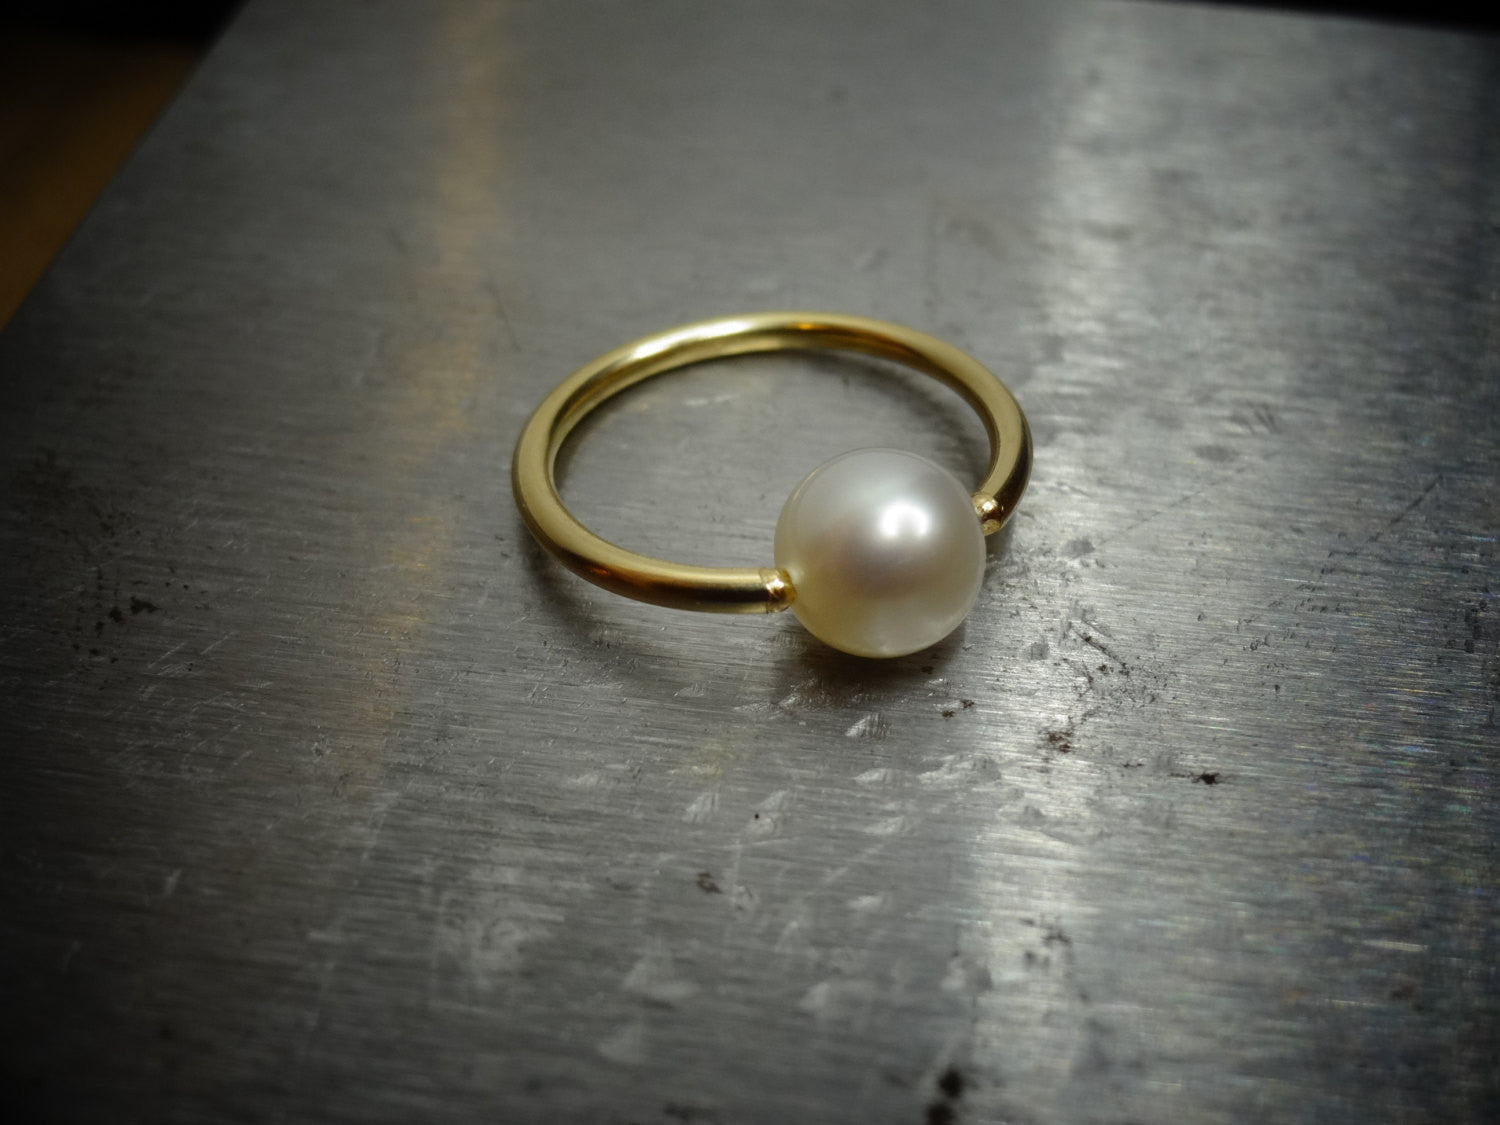 6mm White Pearl Captive Bead Ring - 16 ga Hoop VARIETY - 14k Gold (Y, W, or R), Sterling Silver, or Platinum